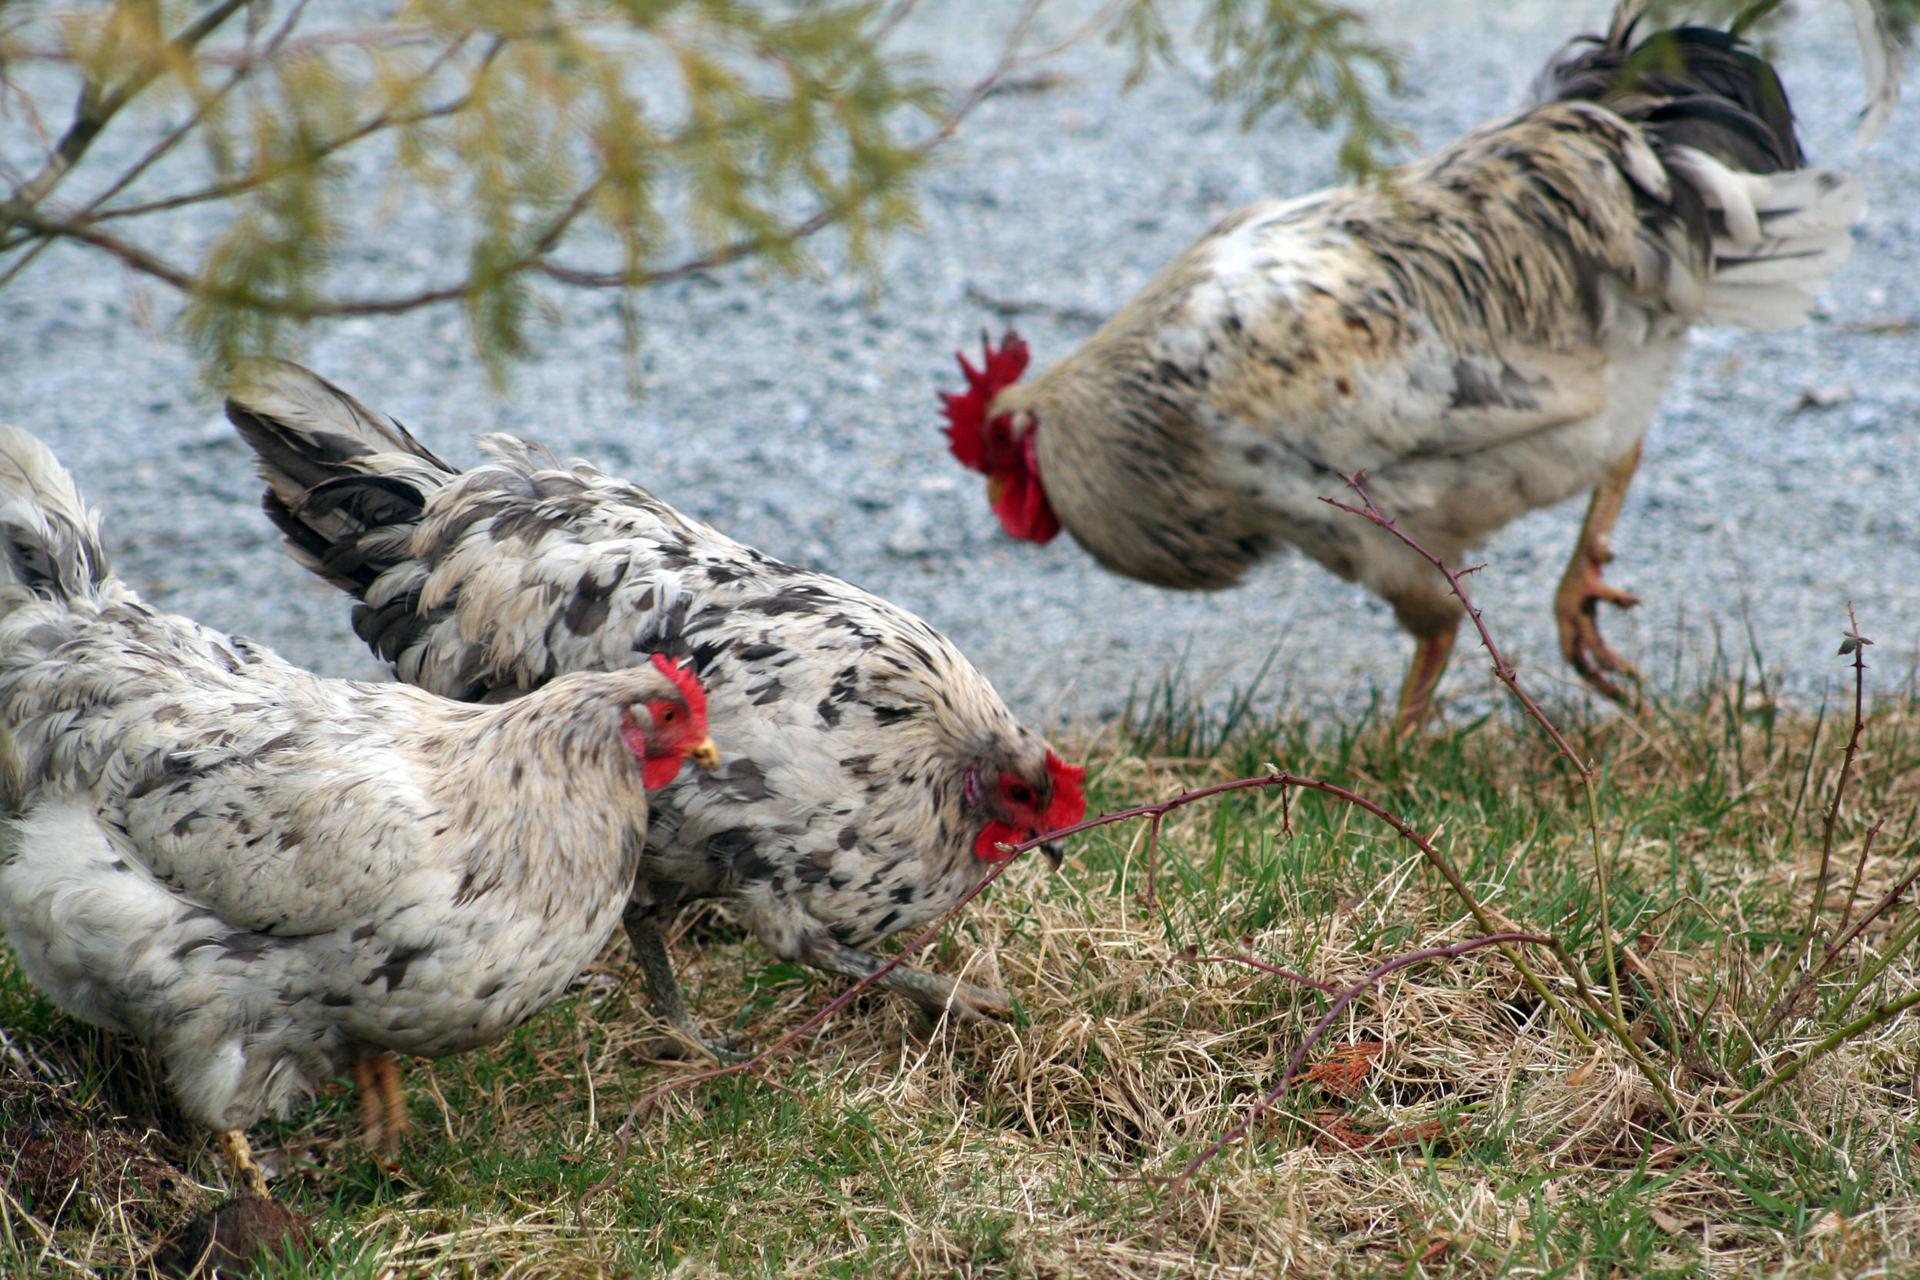 Flock of speckled chickens